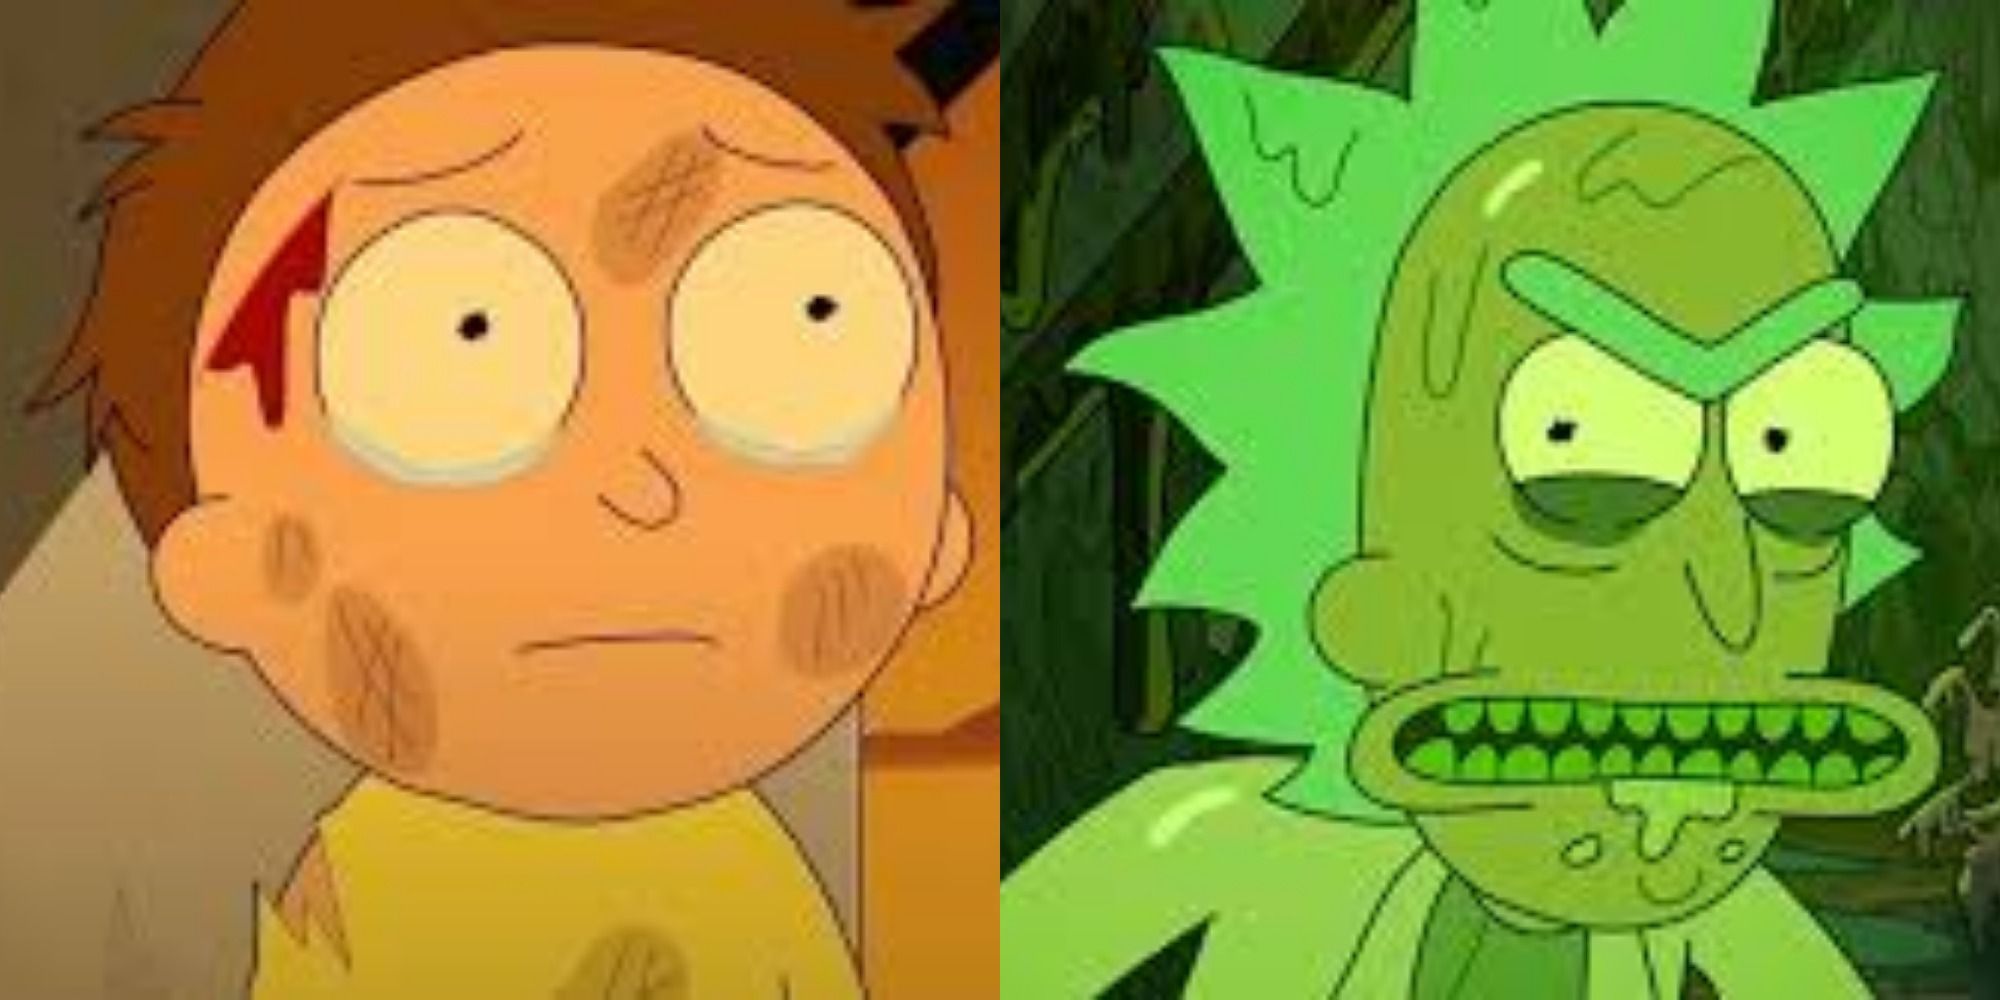 Morty Smith and Rick Sanchez from Rick & Morty